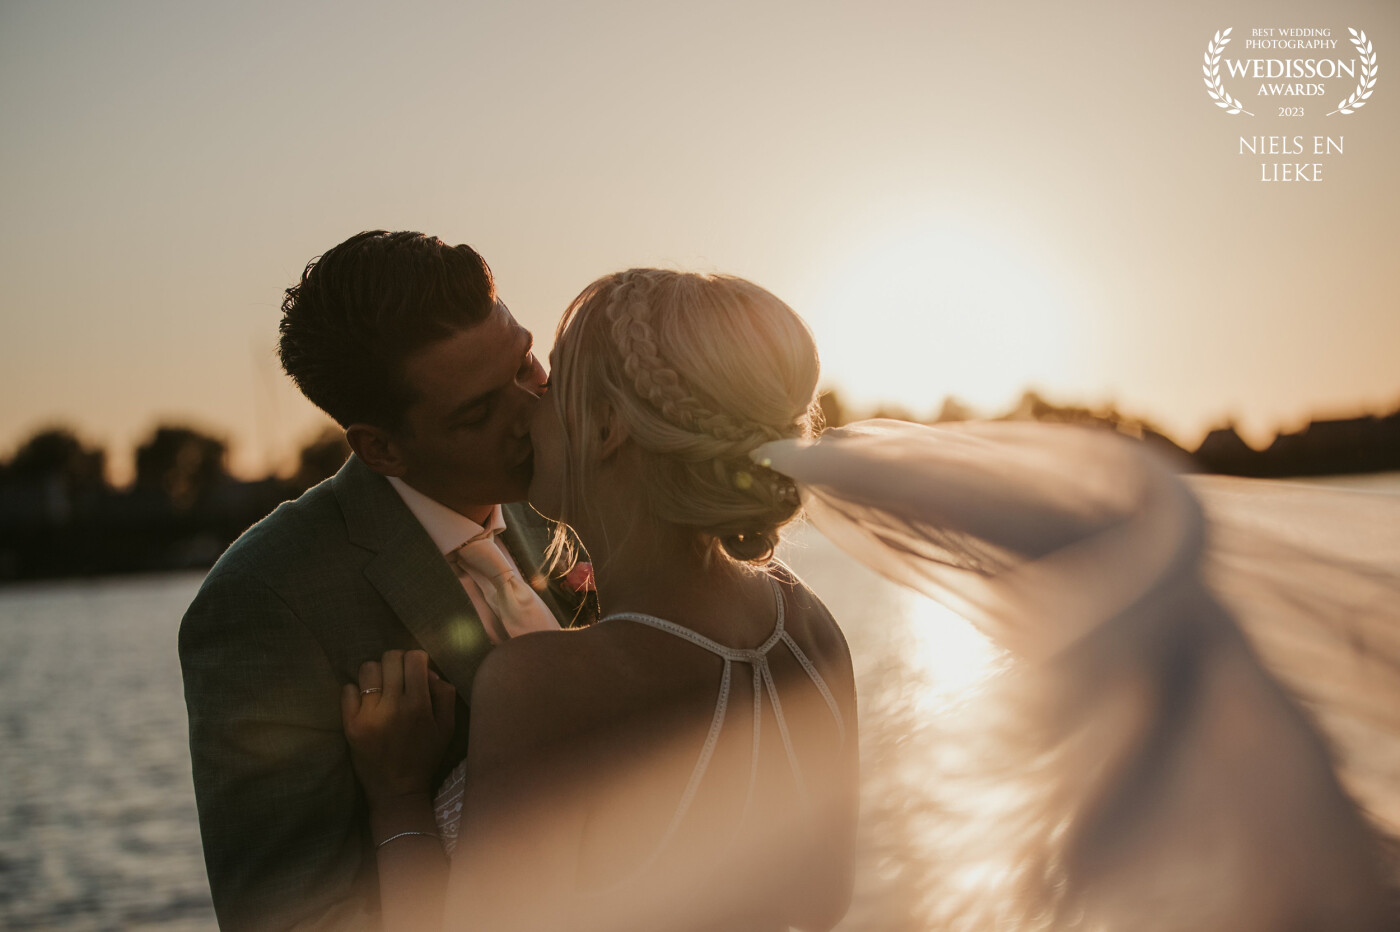 We had the privilege of capturing this beautiful bridal couple in Oesterdam. On a pier, there was a gentle breeze and the light reflected beautifully through the bride's veil, creating a magnificent palette of colors and composition.